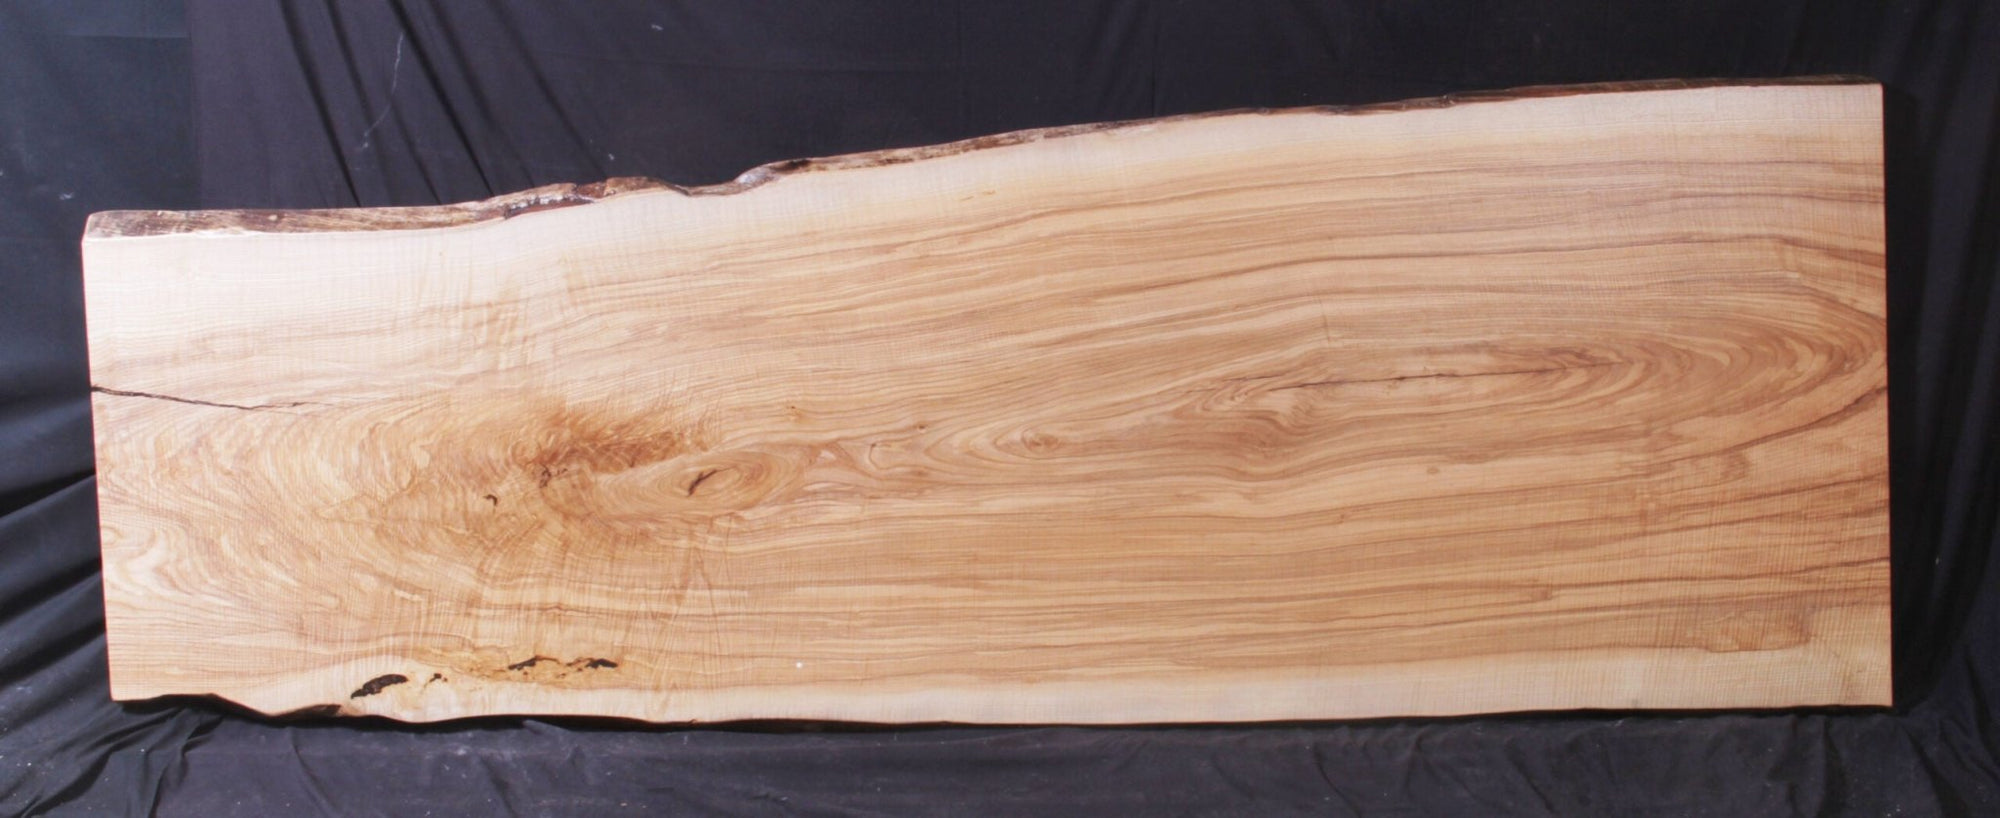 Ash 35" - 45" wide x 129" long x 2 1/2" thick Live Edge Slab - snyders.furniture